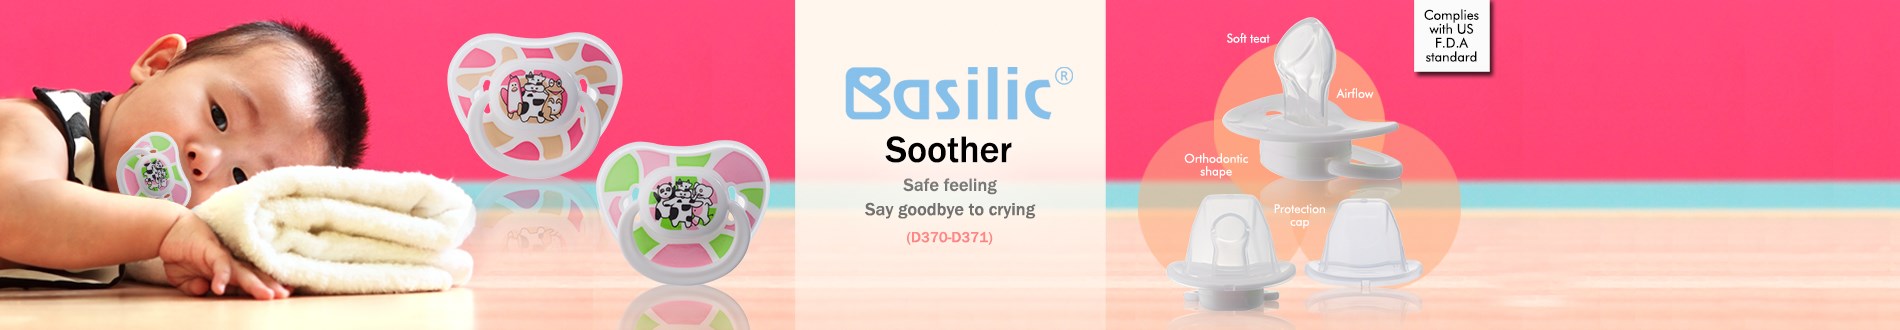 Basilic soother- orthodontic shape (D370-D371)